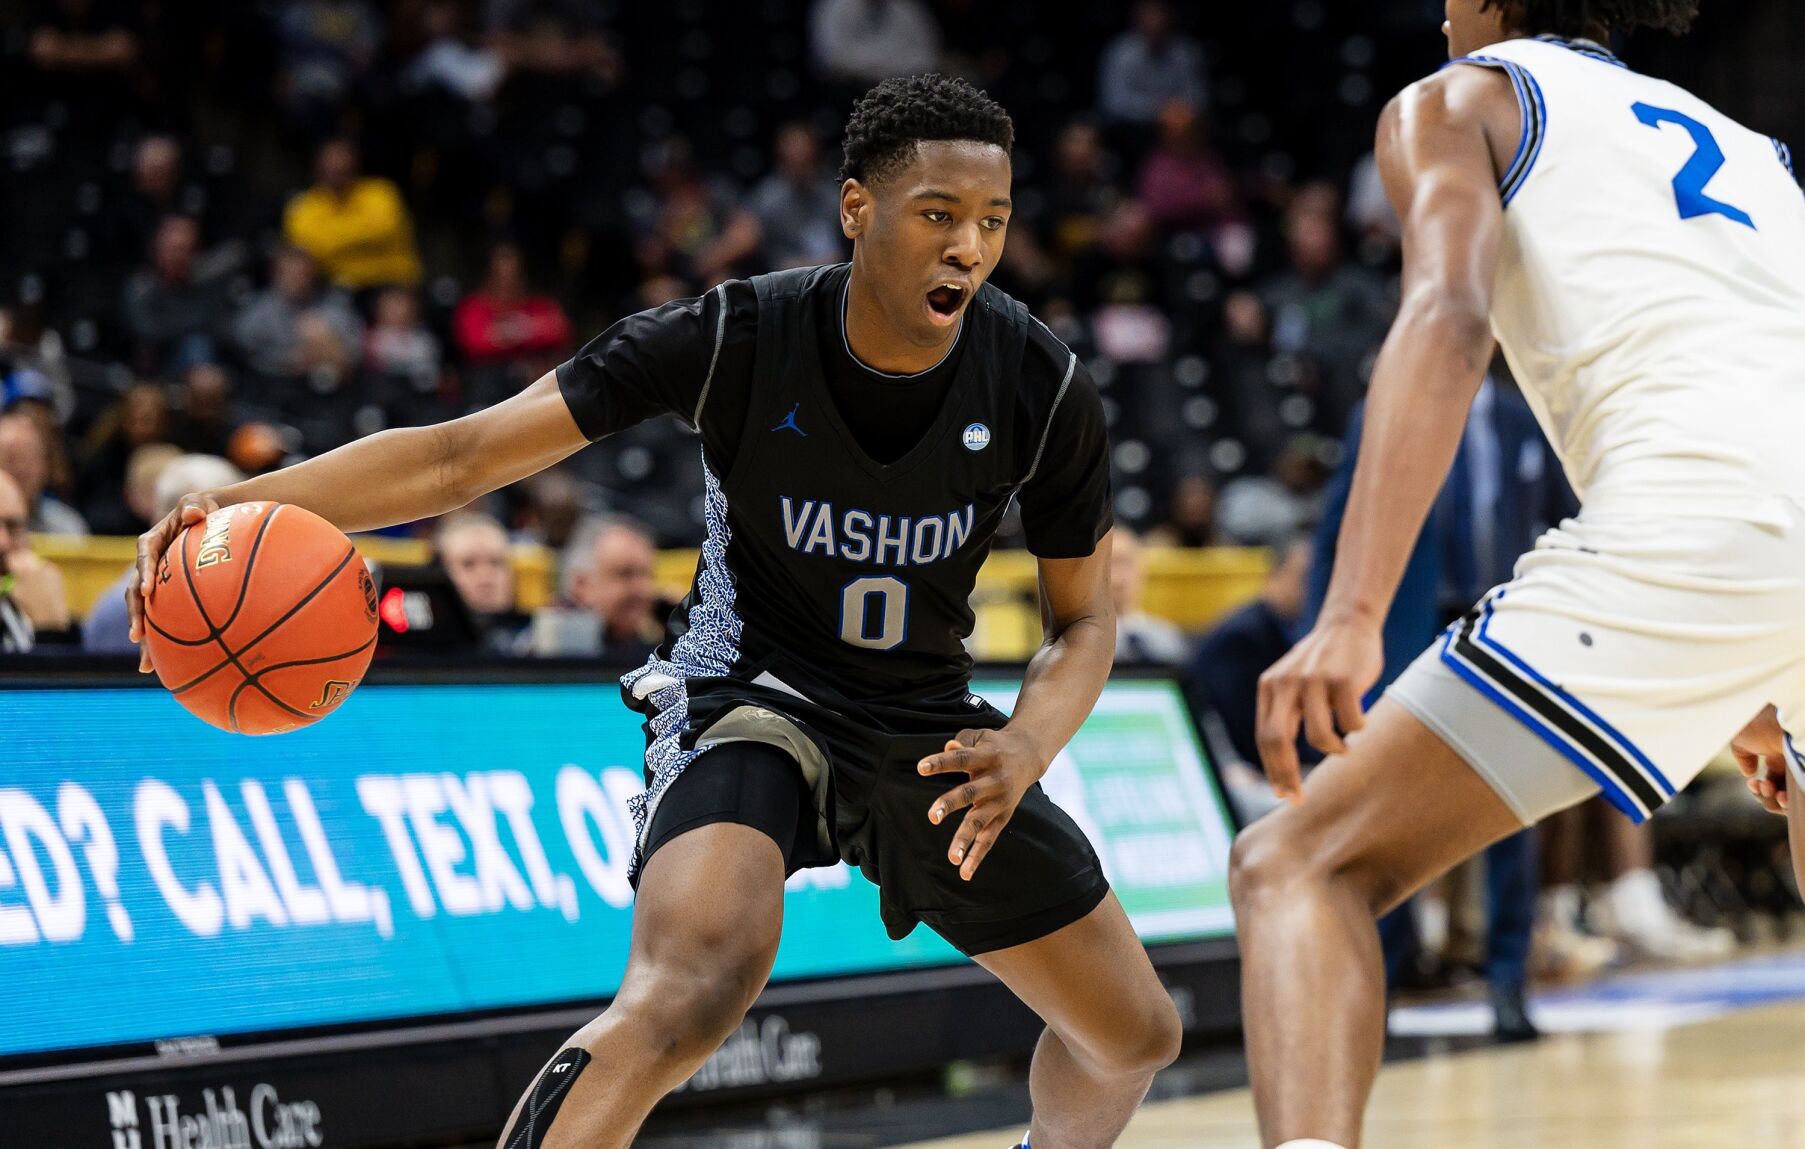 Vashon High School basketball team secures fifth successive state championship bid with Jimmy McKinney III’s exceptional four-point play